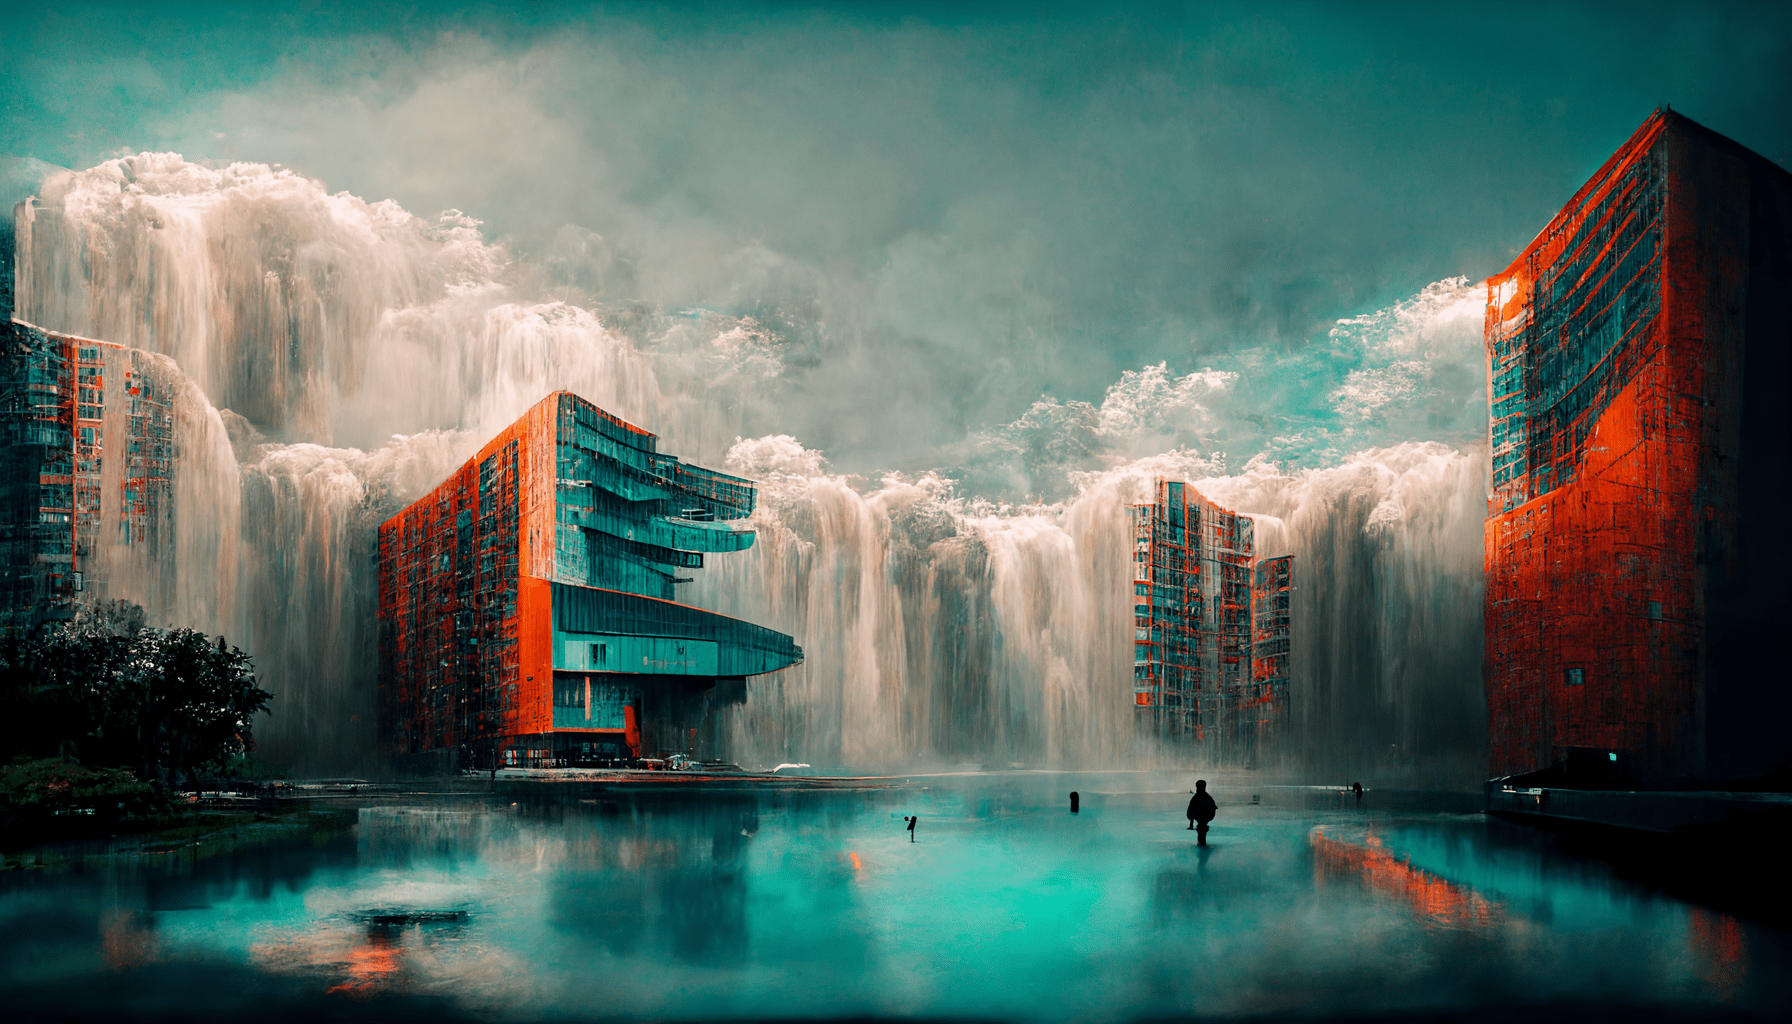 I strive just to say I’m alright – Aquapunk water and architecture